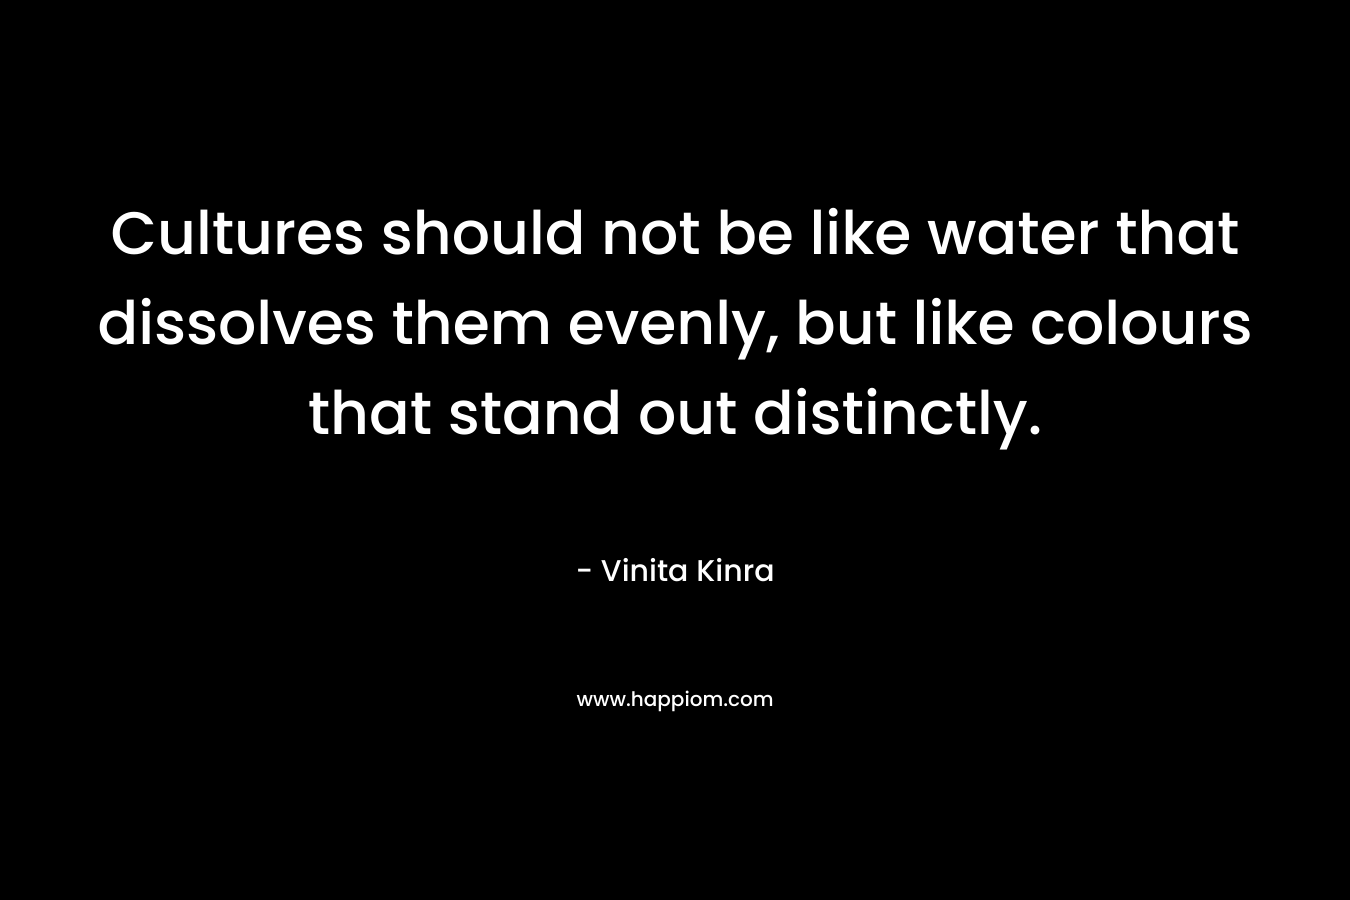 Cultures should not be like water that dissolves them evenly, but like colours that stand out distinctly.